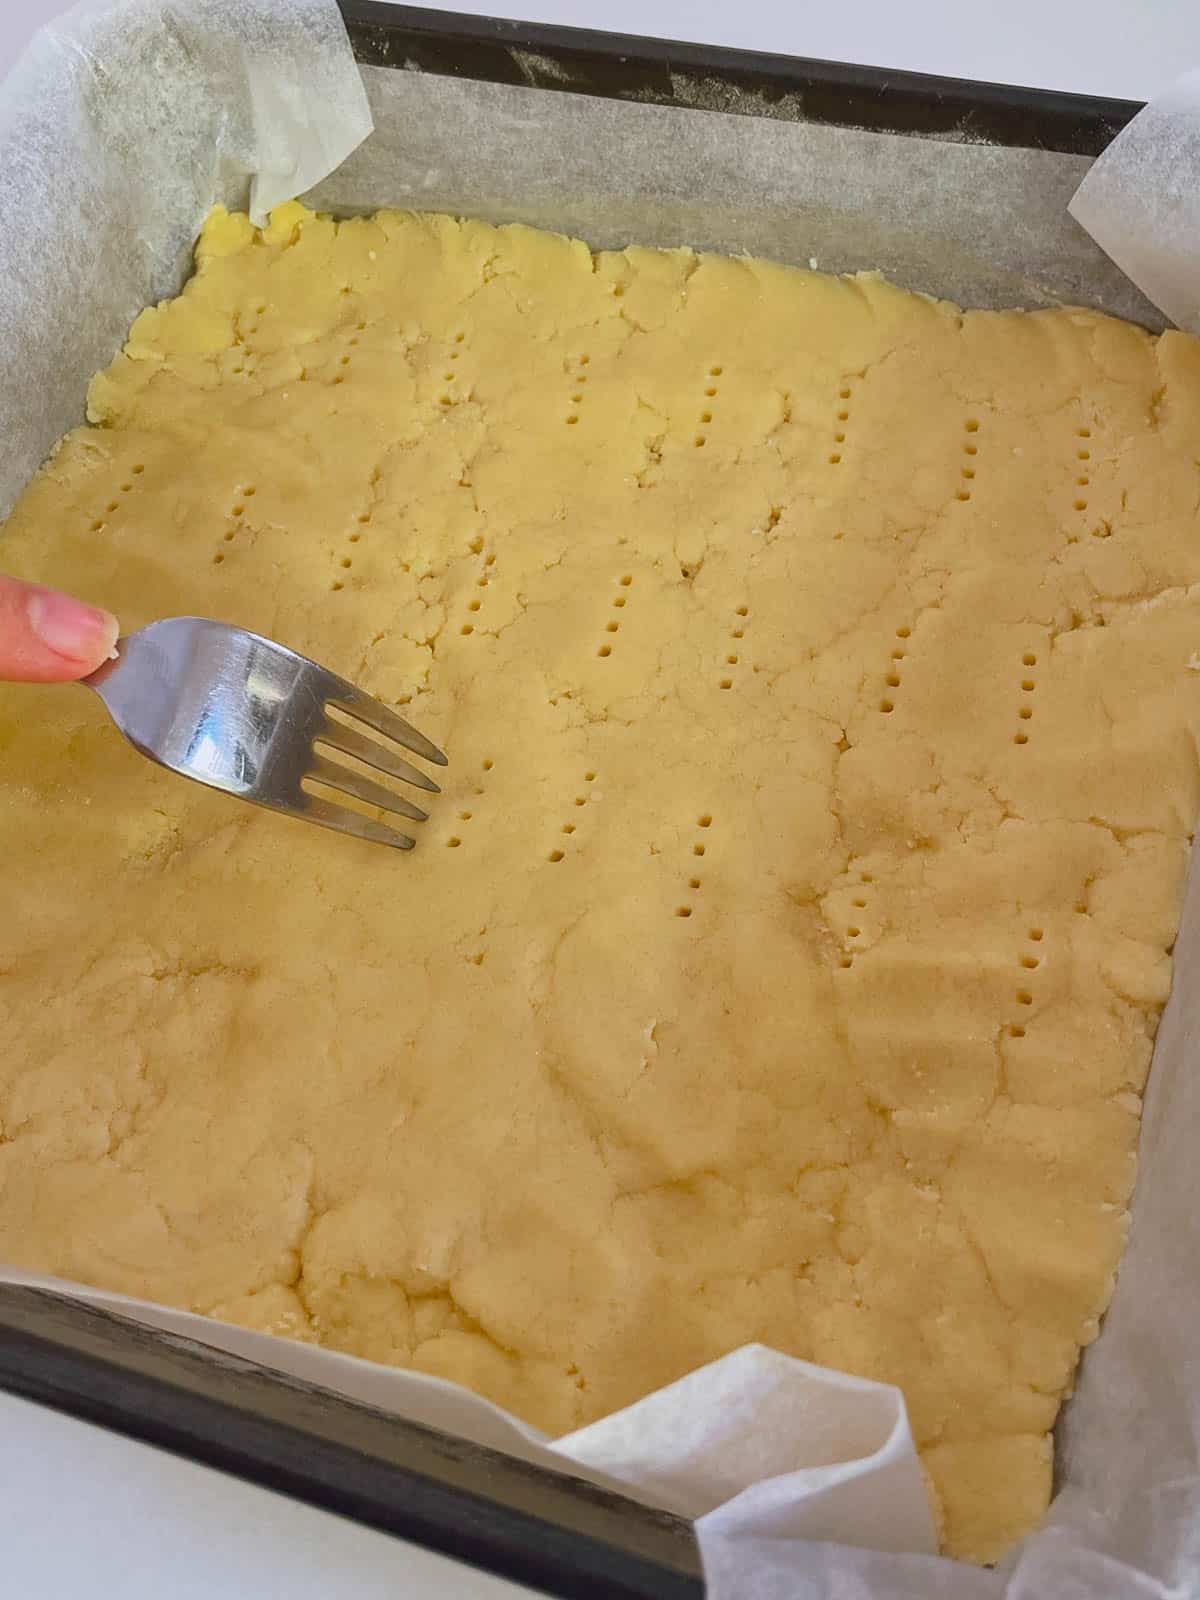 Pricking shortbread with a fork.